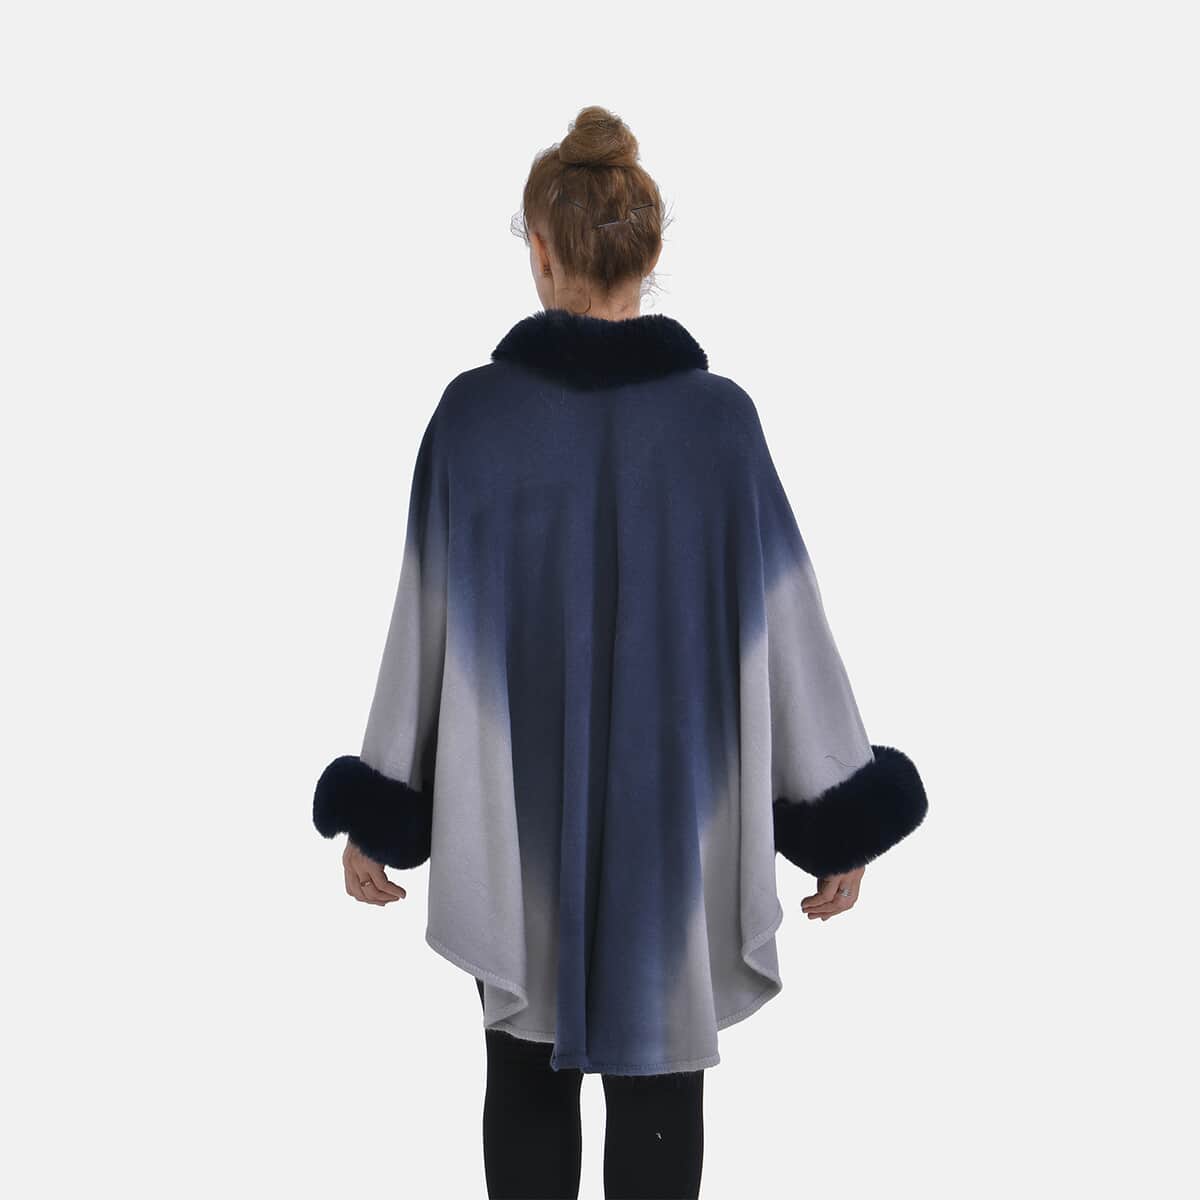 Tamsy Blue Ombre Cape with Faux Fur Trim - One Size Fits Most image number 1